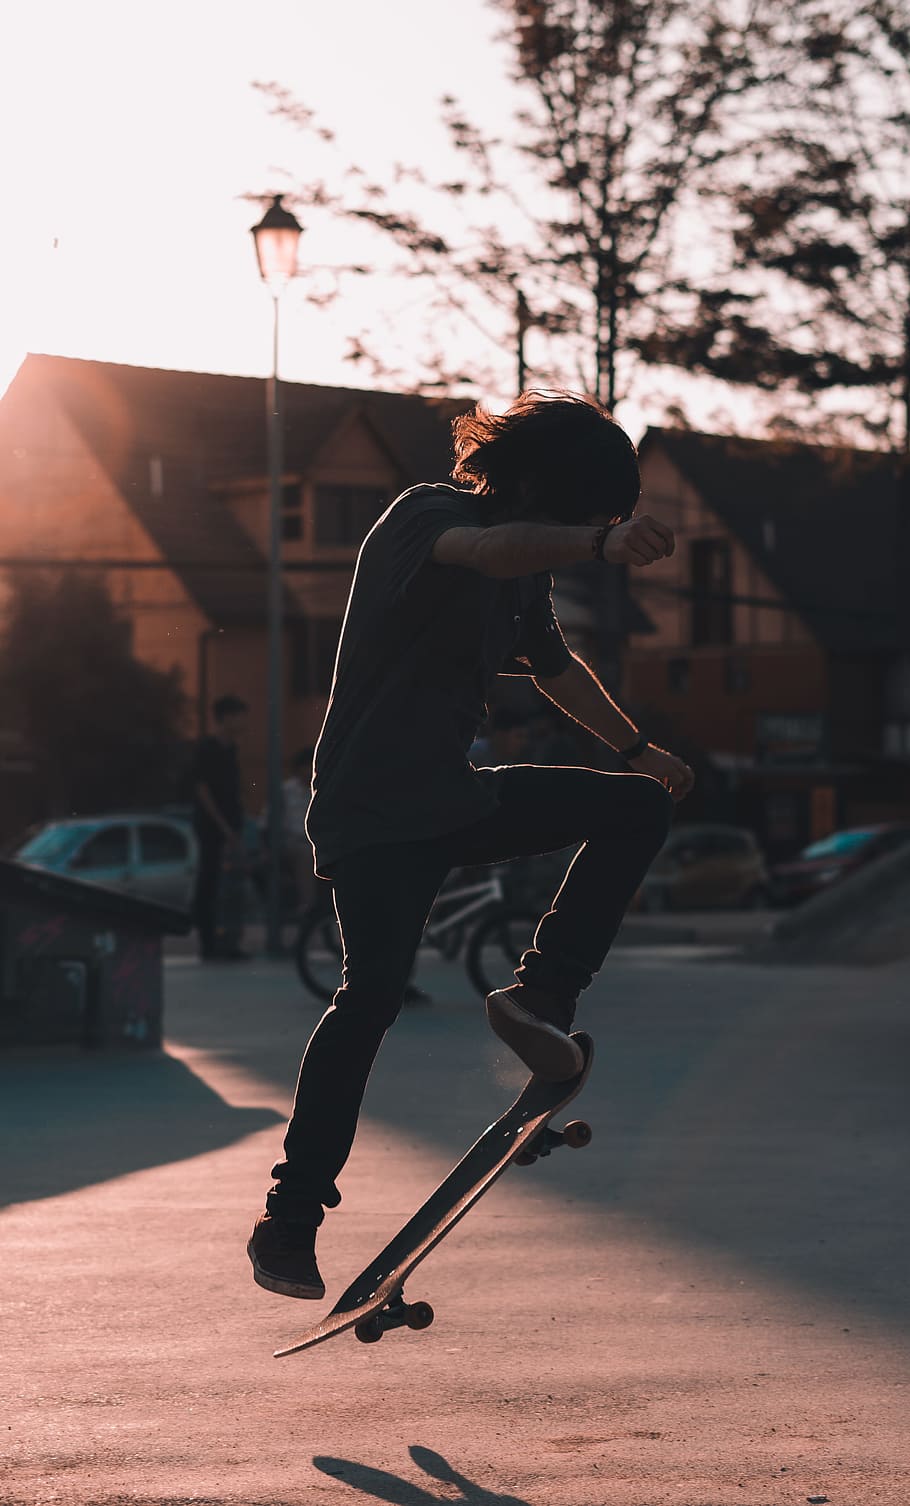 Update 97+ aesthetic skater wallpapers latest - in.cdgdbentre